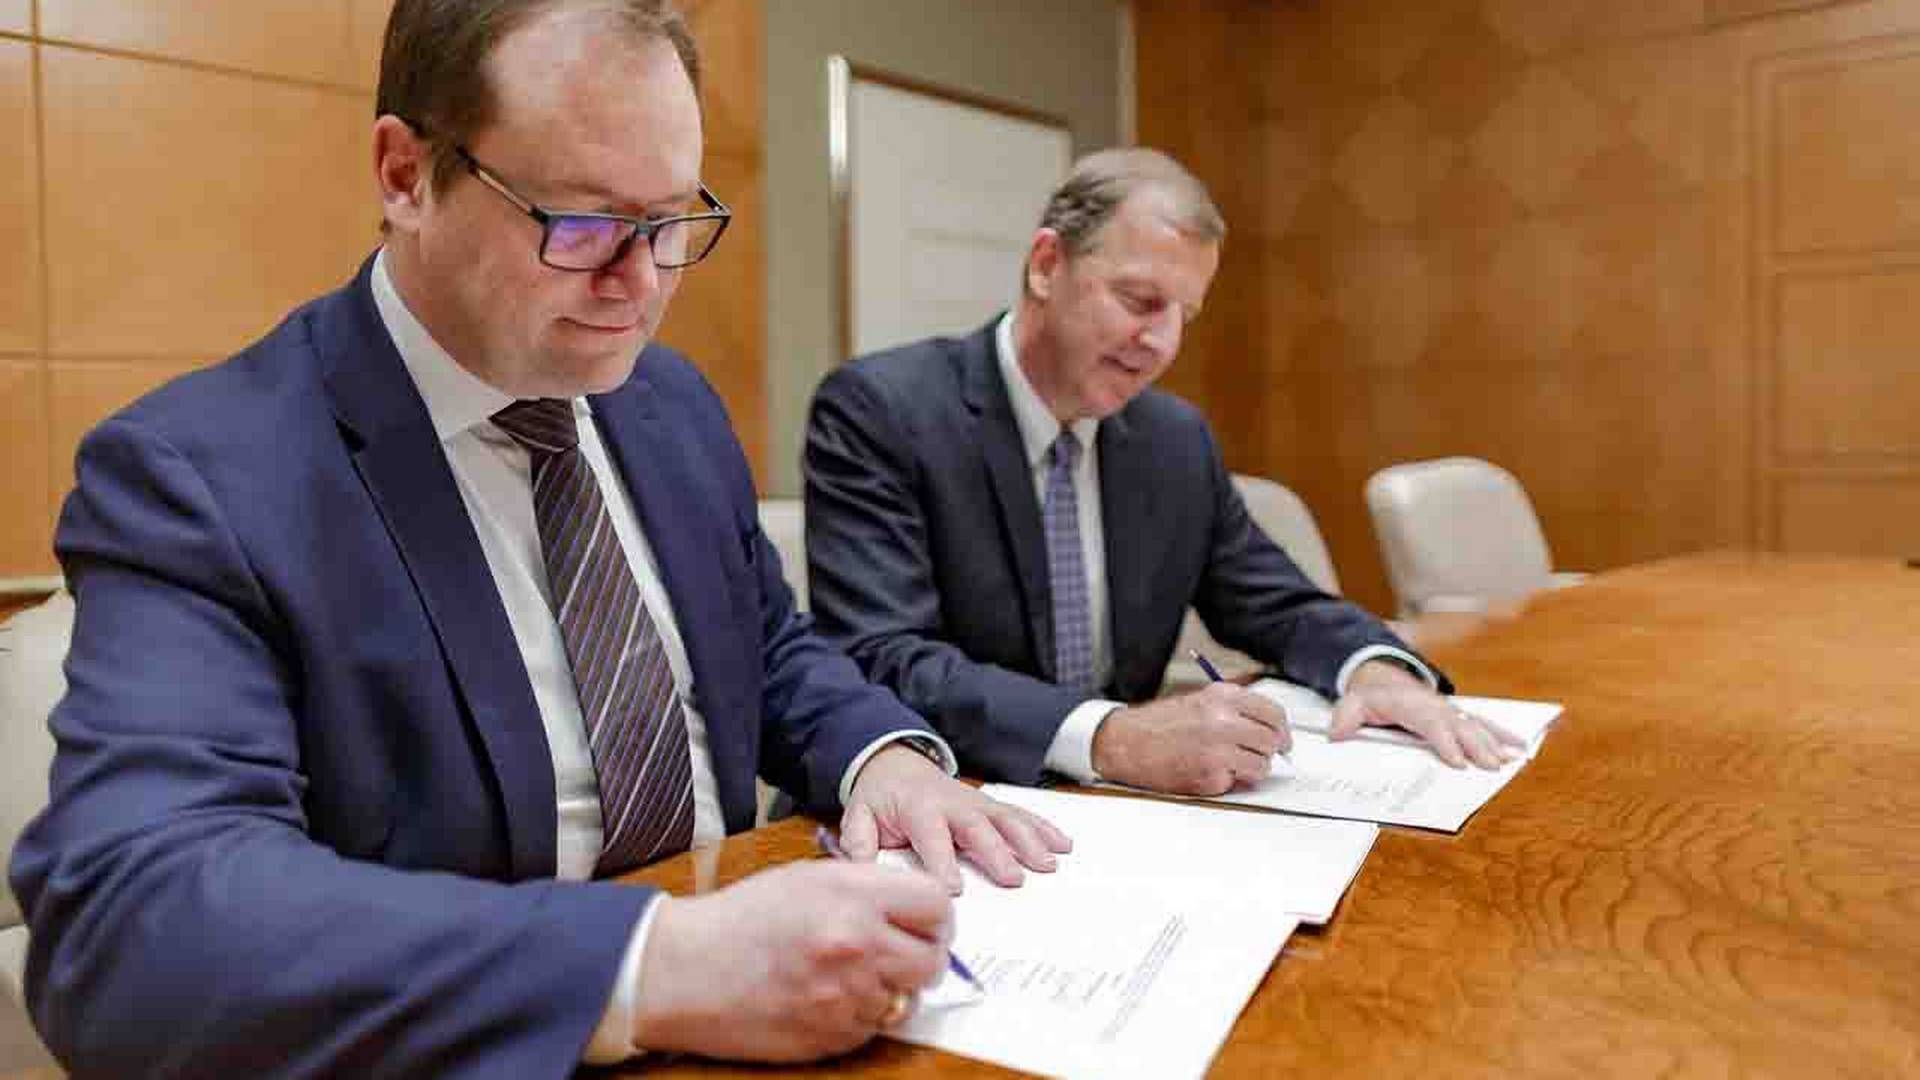 Jens-Peter Saul, CEO of Rambøll (left) and Jim Fox, CEO of OBG (right) signing the deal. | Photo: PR